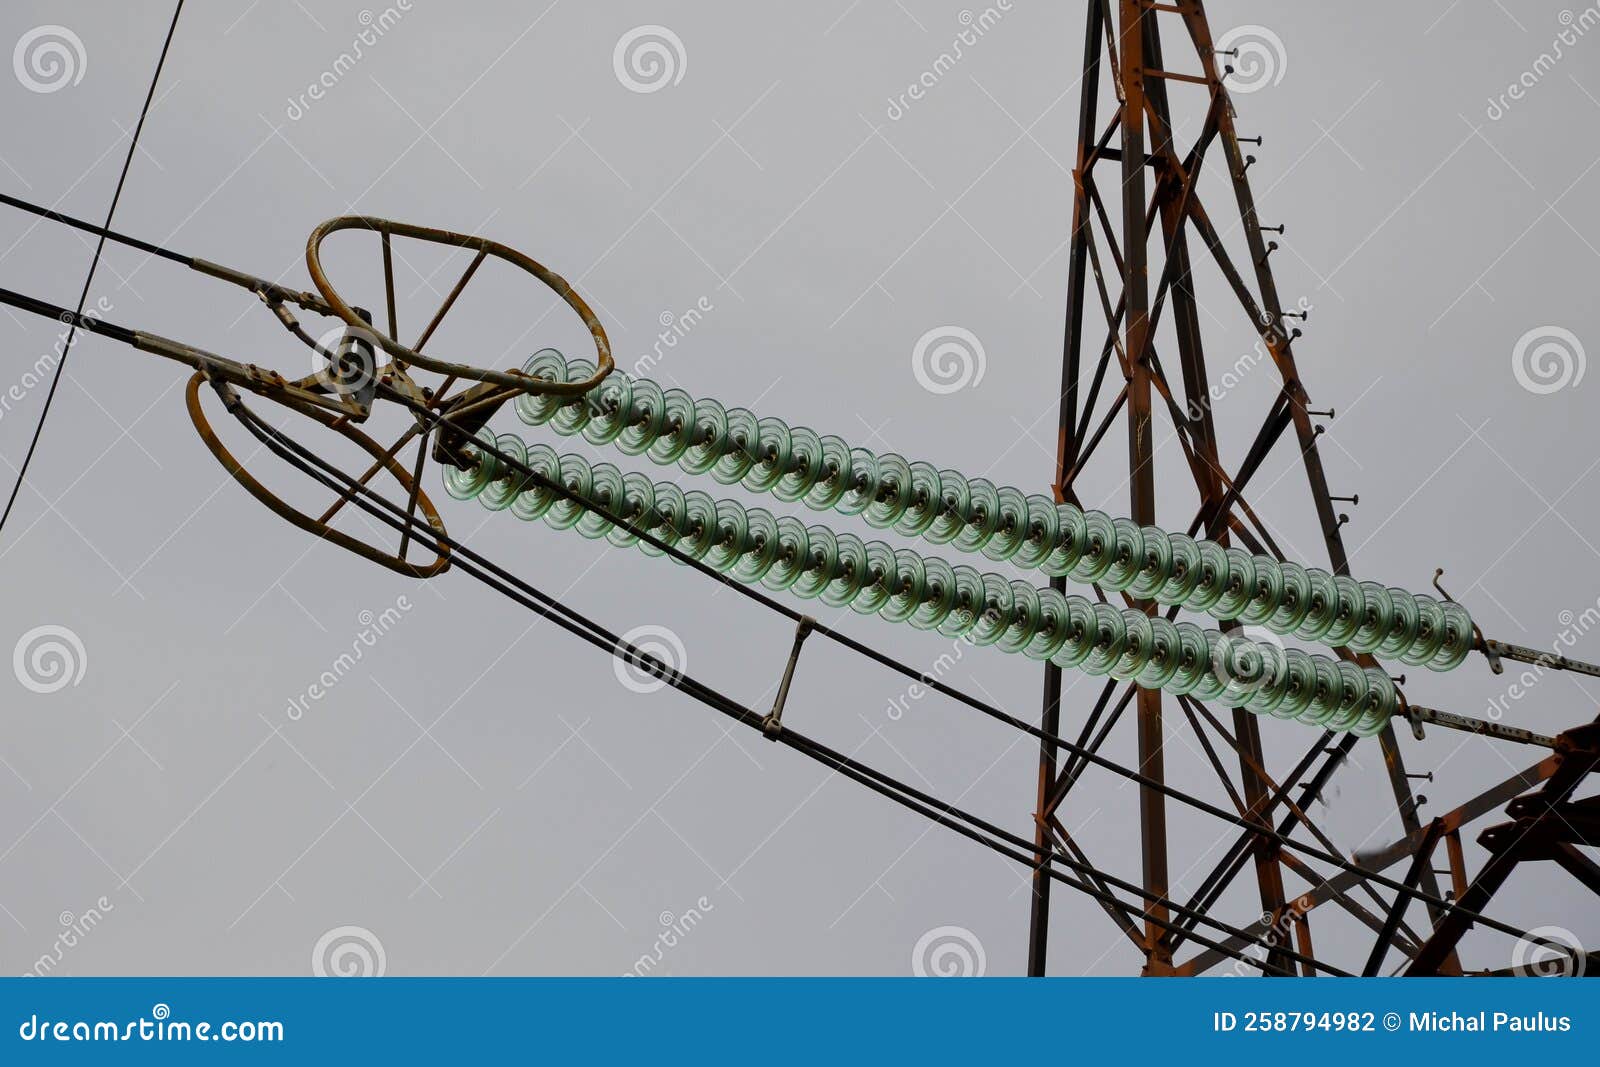 Power Lines On Background Blue Sky Stock Photo 1175844340 | Shutterstock